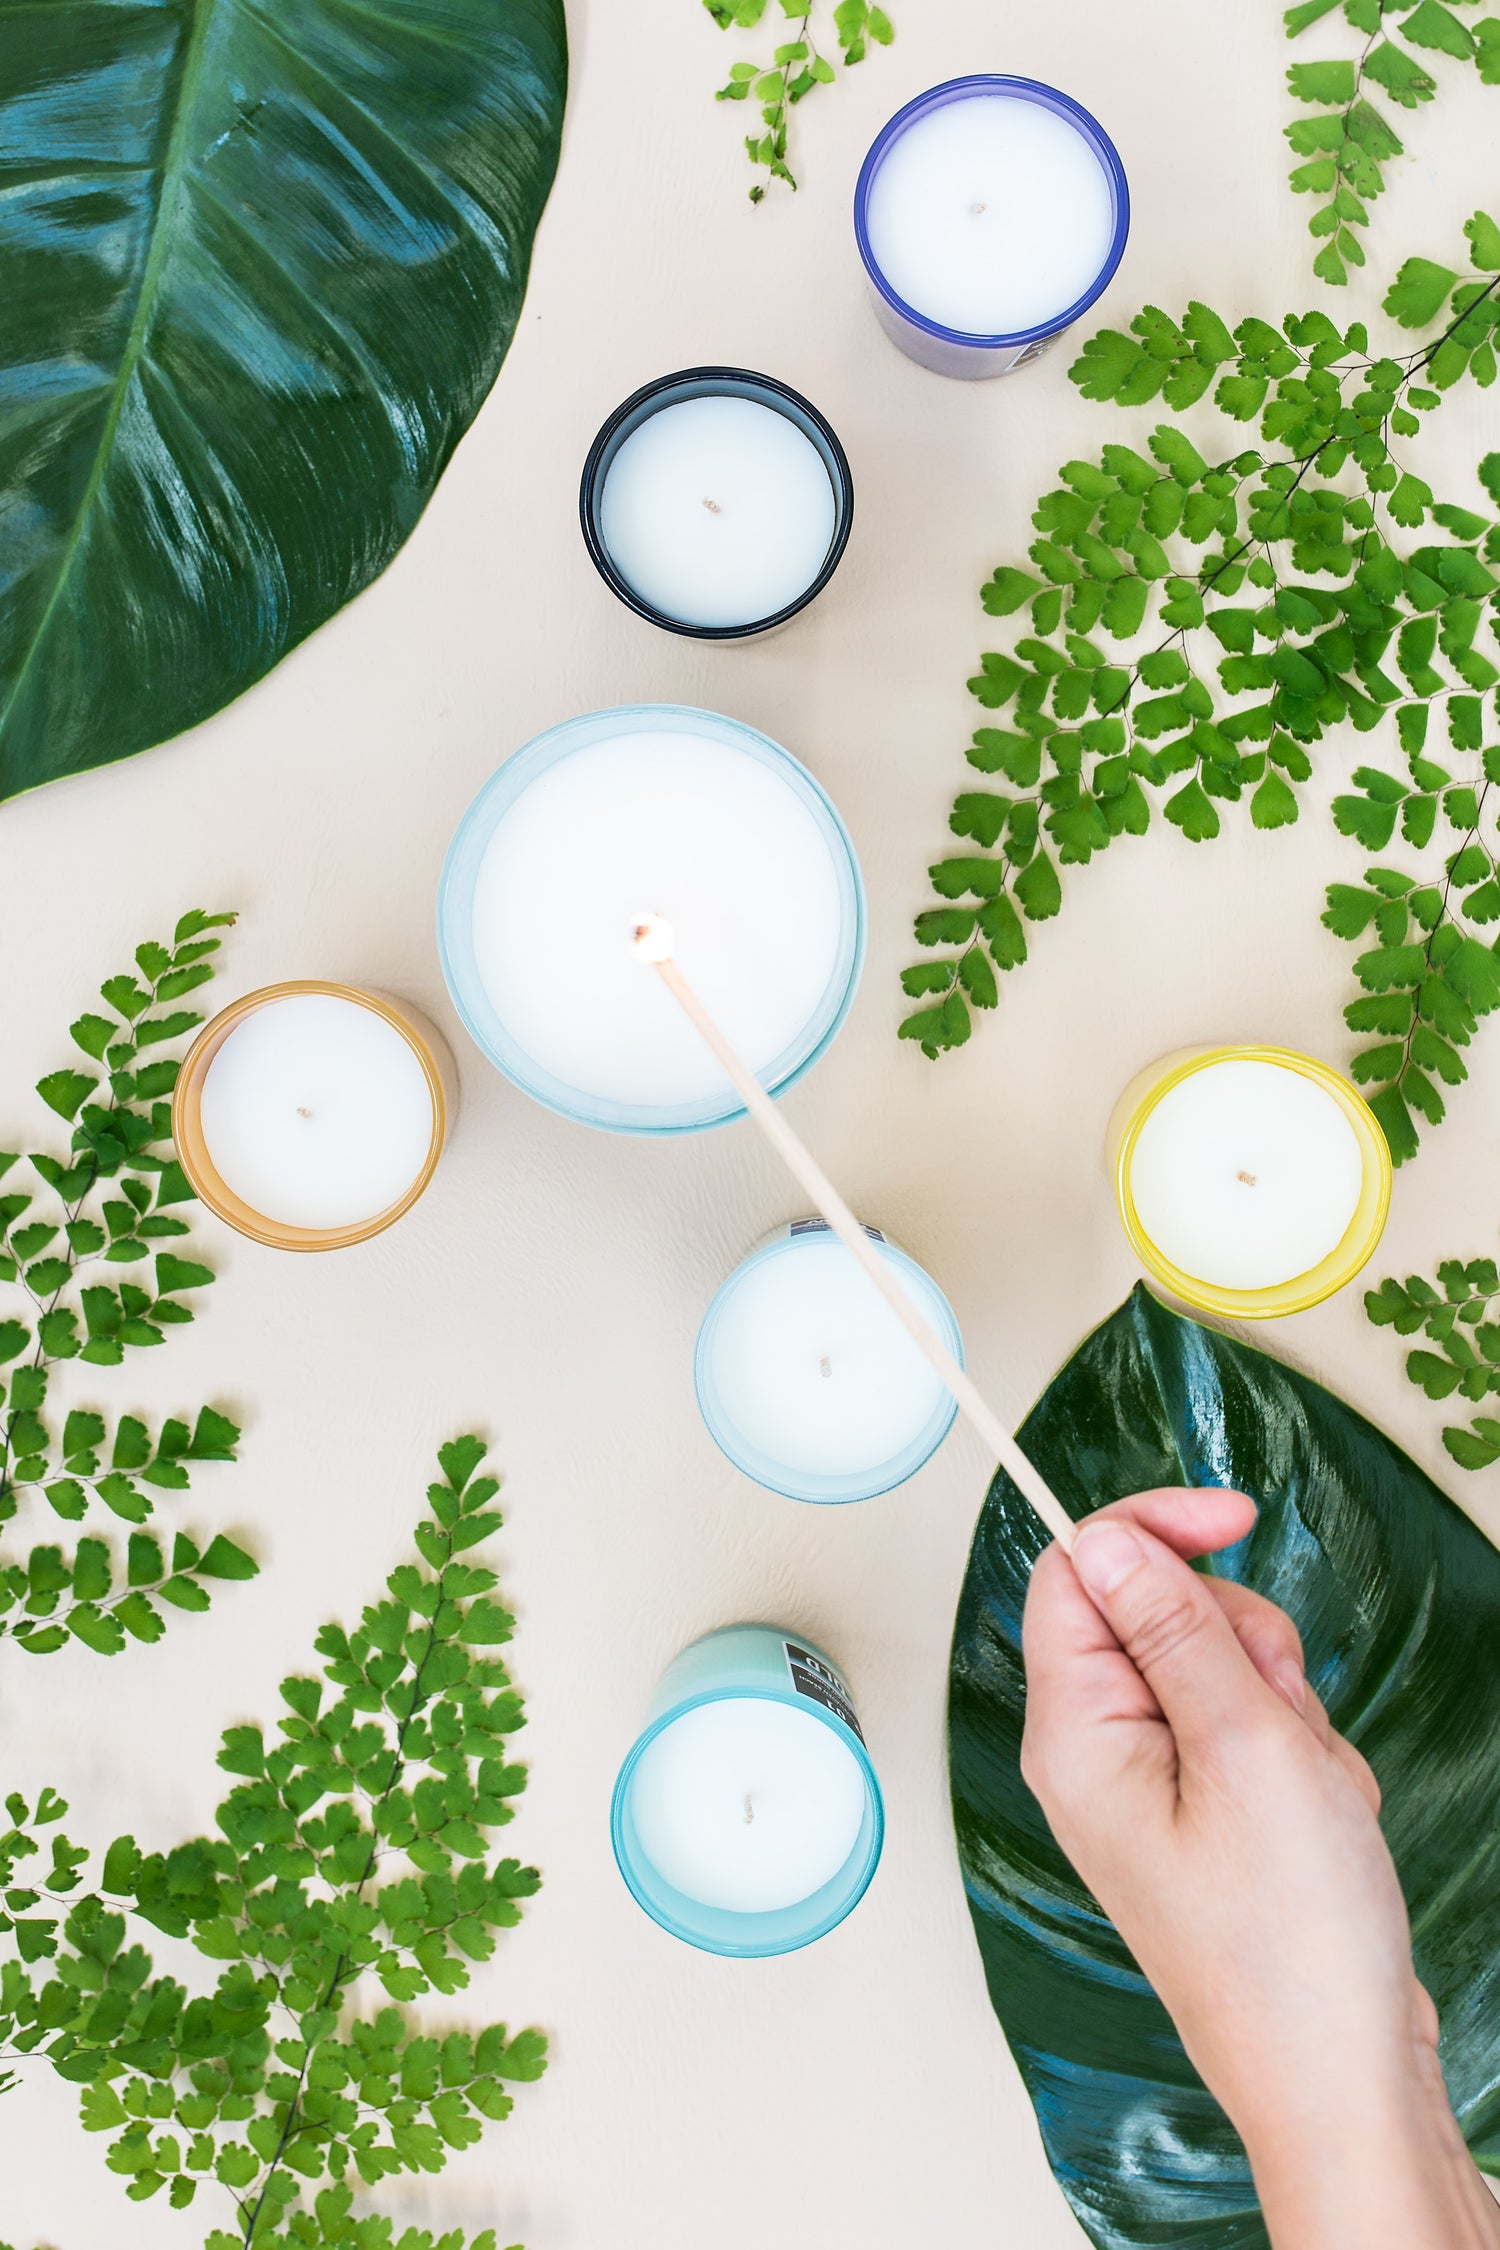 Seven Ways Scented Candles Can Increase Your Wellbeing